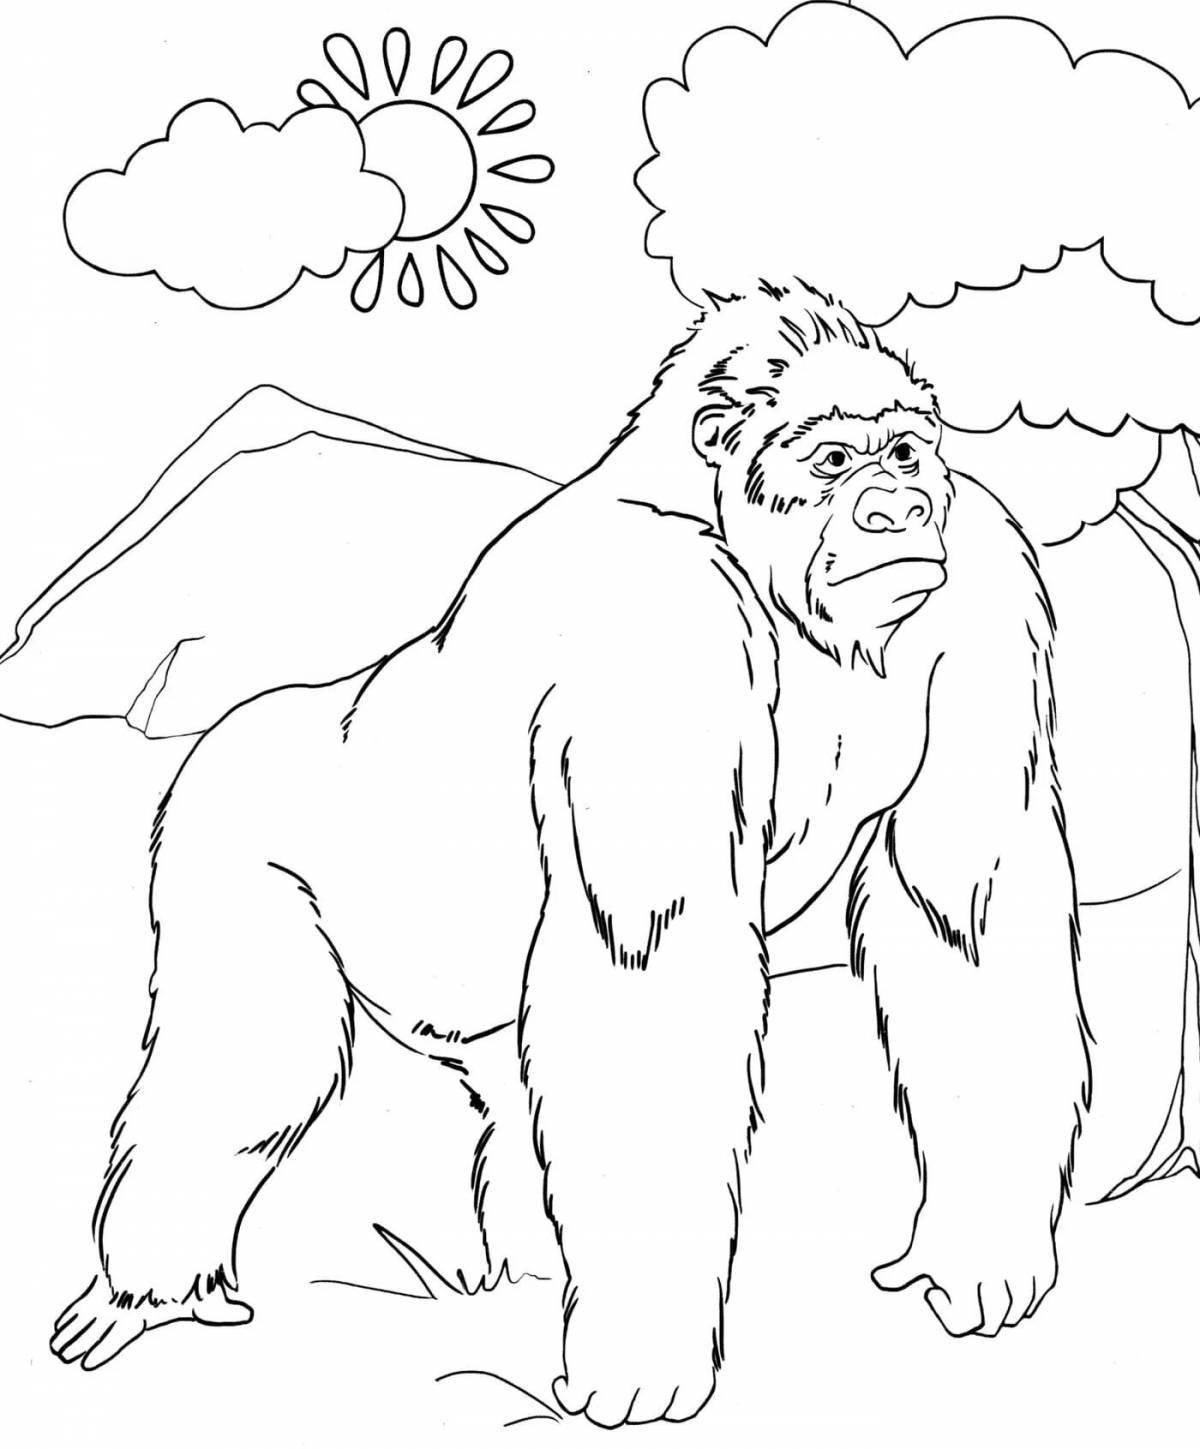 A playful gorilla coloring book for kids